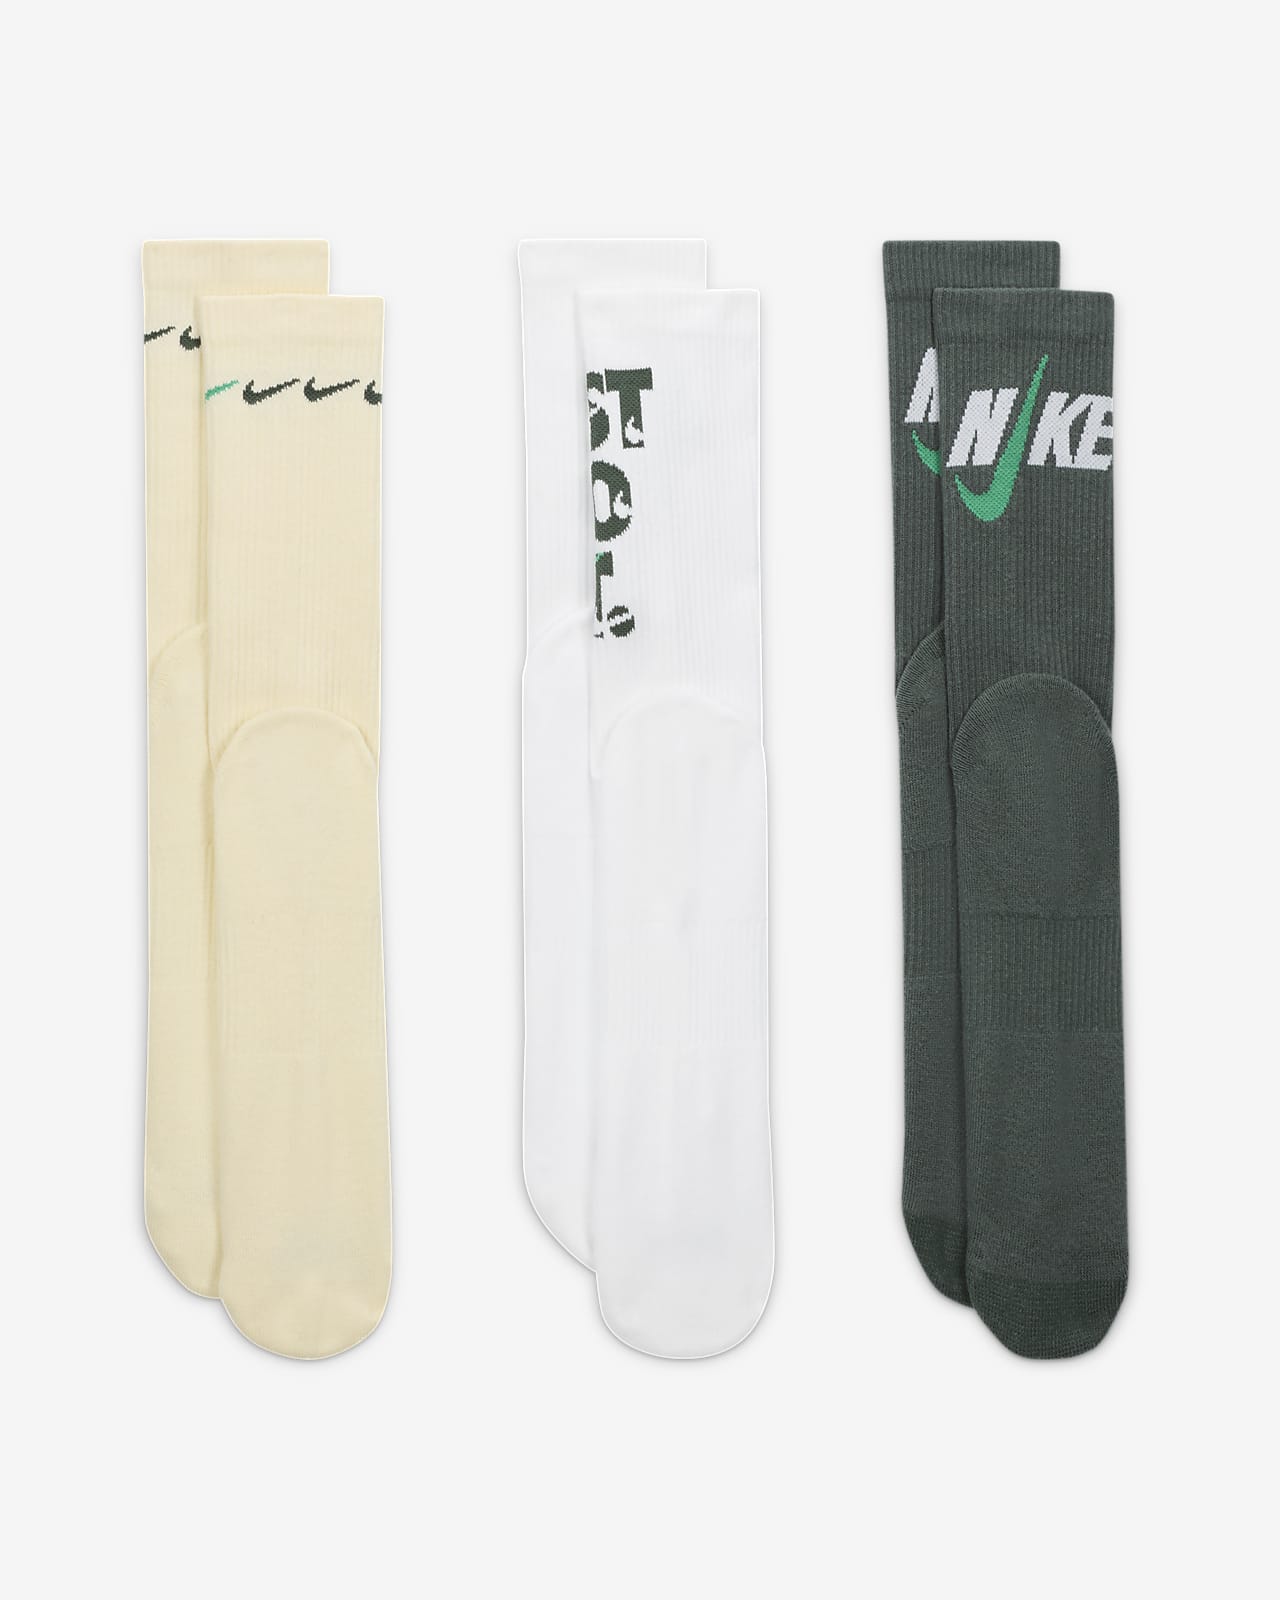 NIKE EVERYDAY PLUS SOCKS (3 PAIRS) - Sports Contact